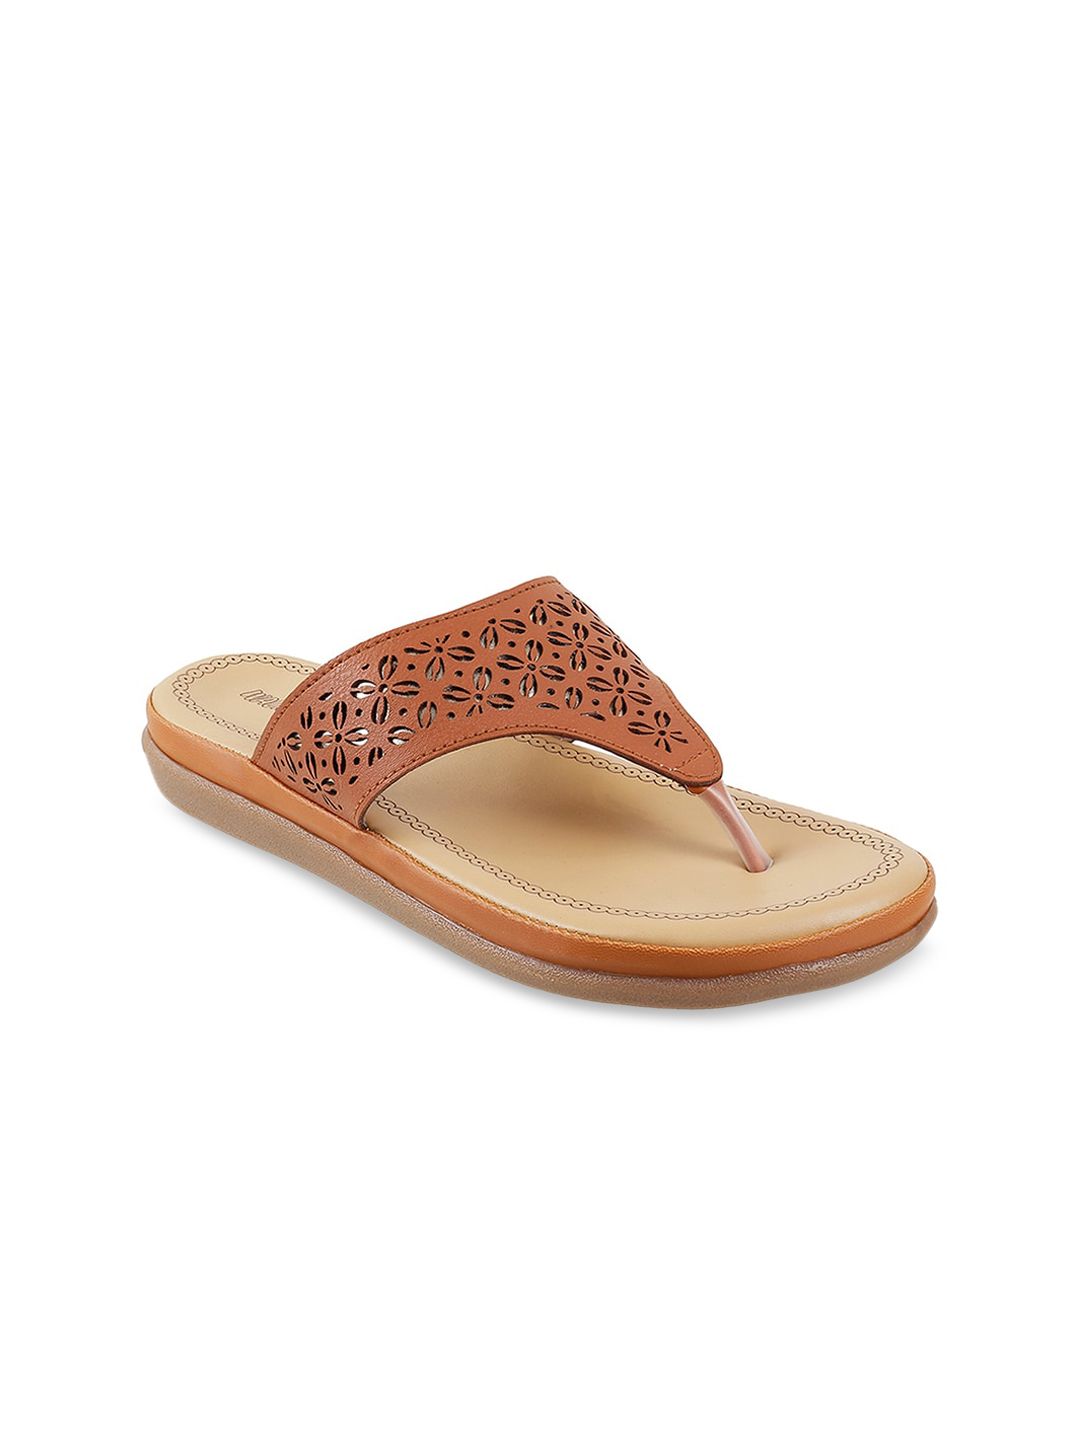 WALKWAY by Metro Women Tan Open Toe Flats with Laser Cuts Price in India